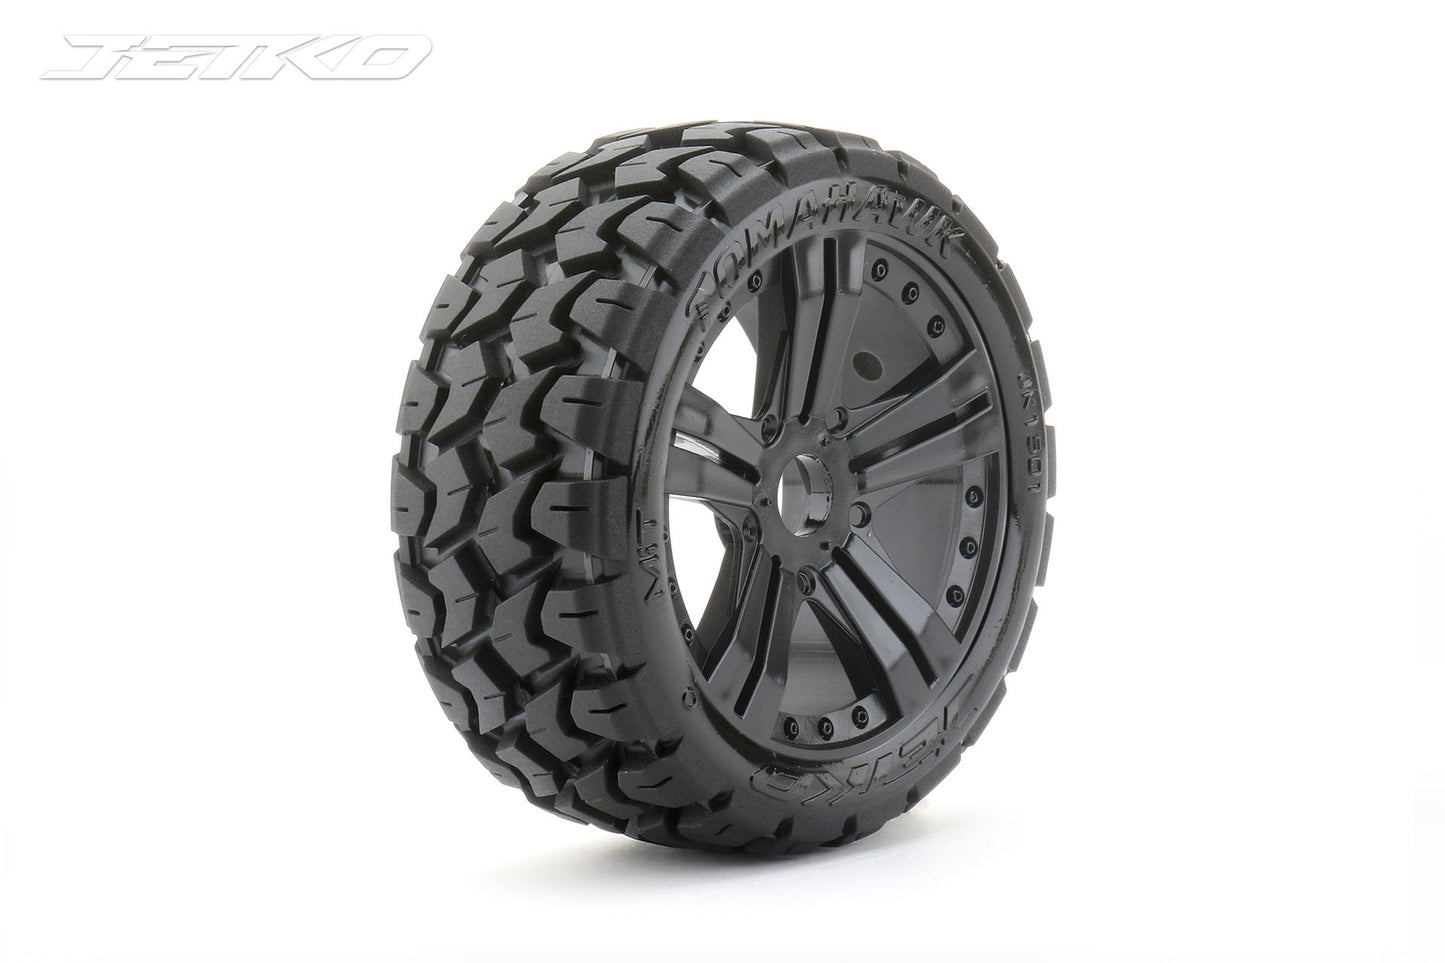 Powerhobby 1/8 Buggy Tomahawk Tires Mounted 17MM Claw Wheels